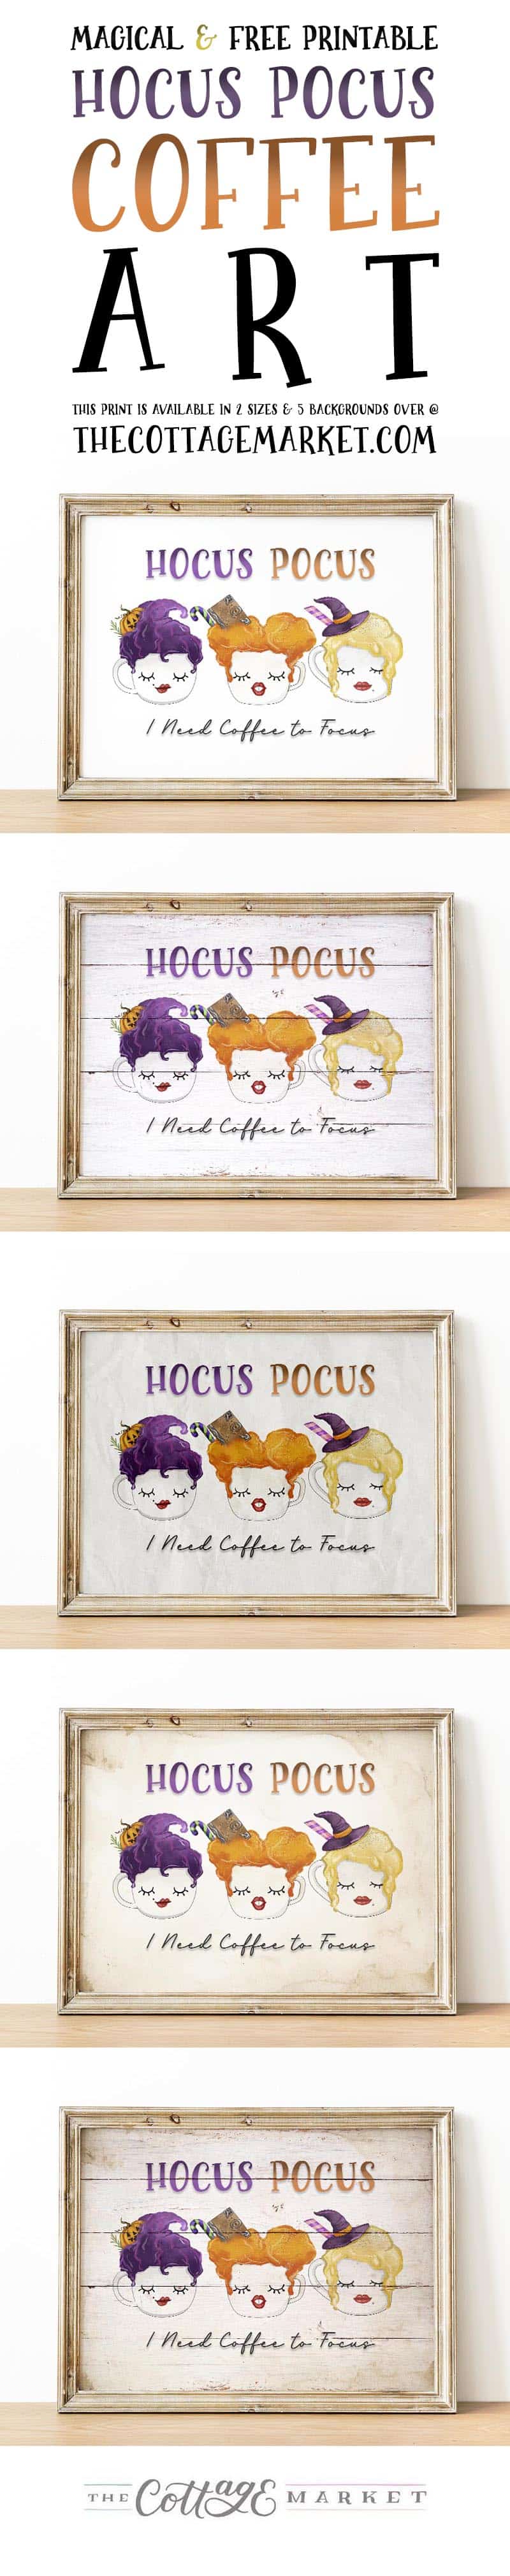 Introducing our magical and free printable Hocus Pocus Coffee Art, a bewitching fusion of two passions that will ignite your creativity